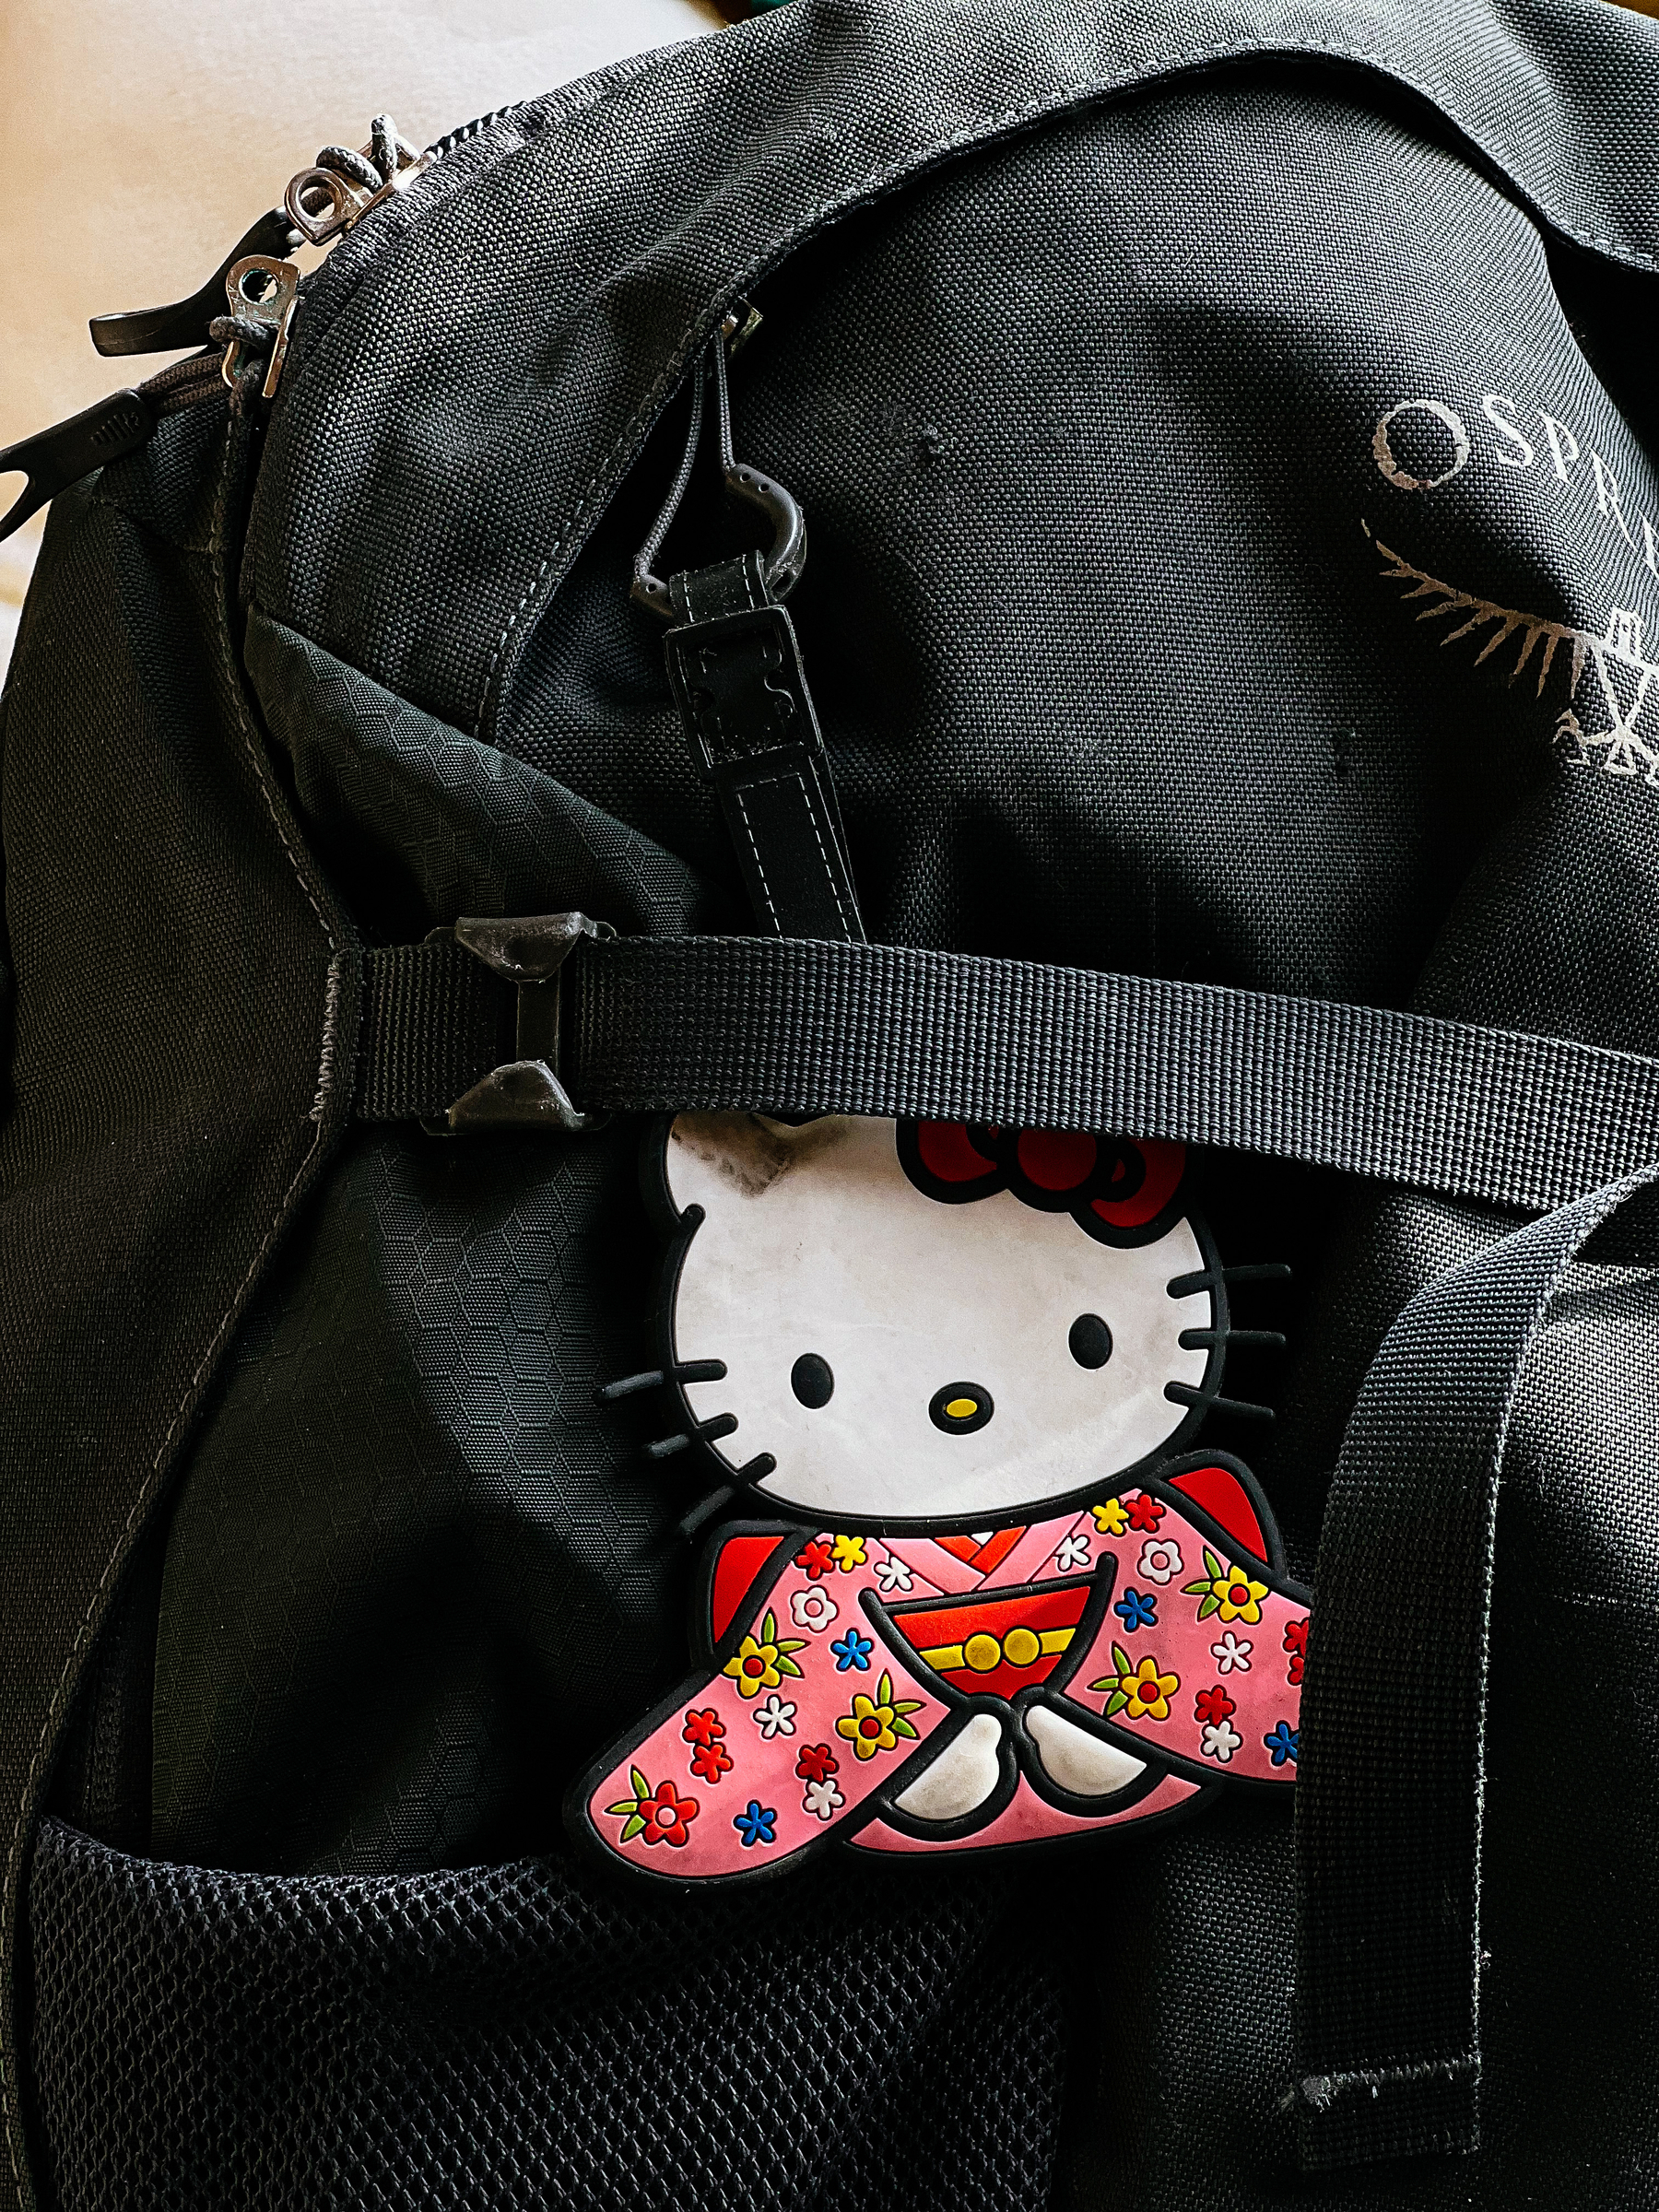 An Hello Kitty wearing a kimono luggage tag, strapped to a black backpack. 